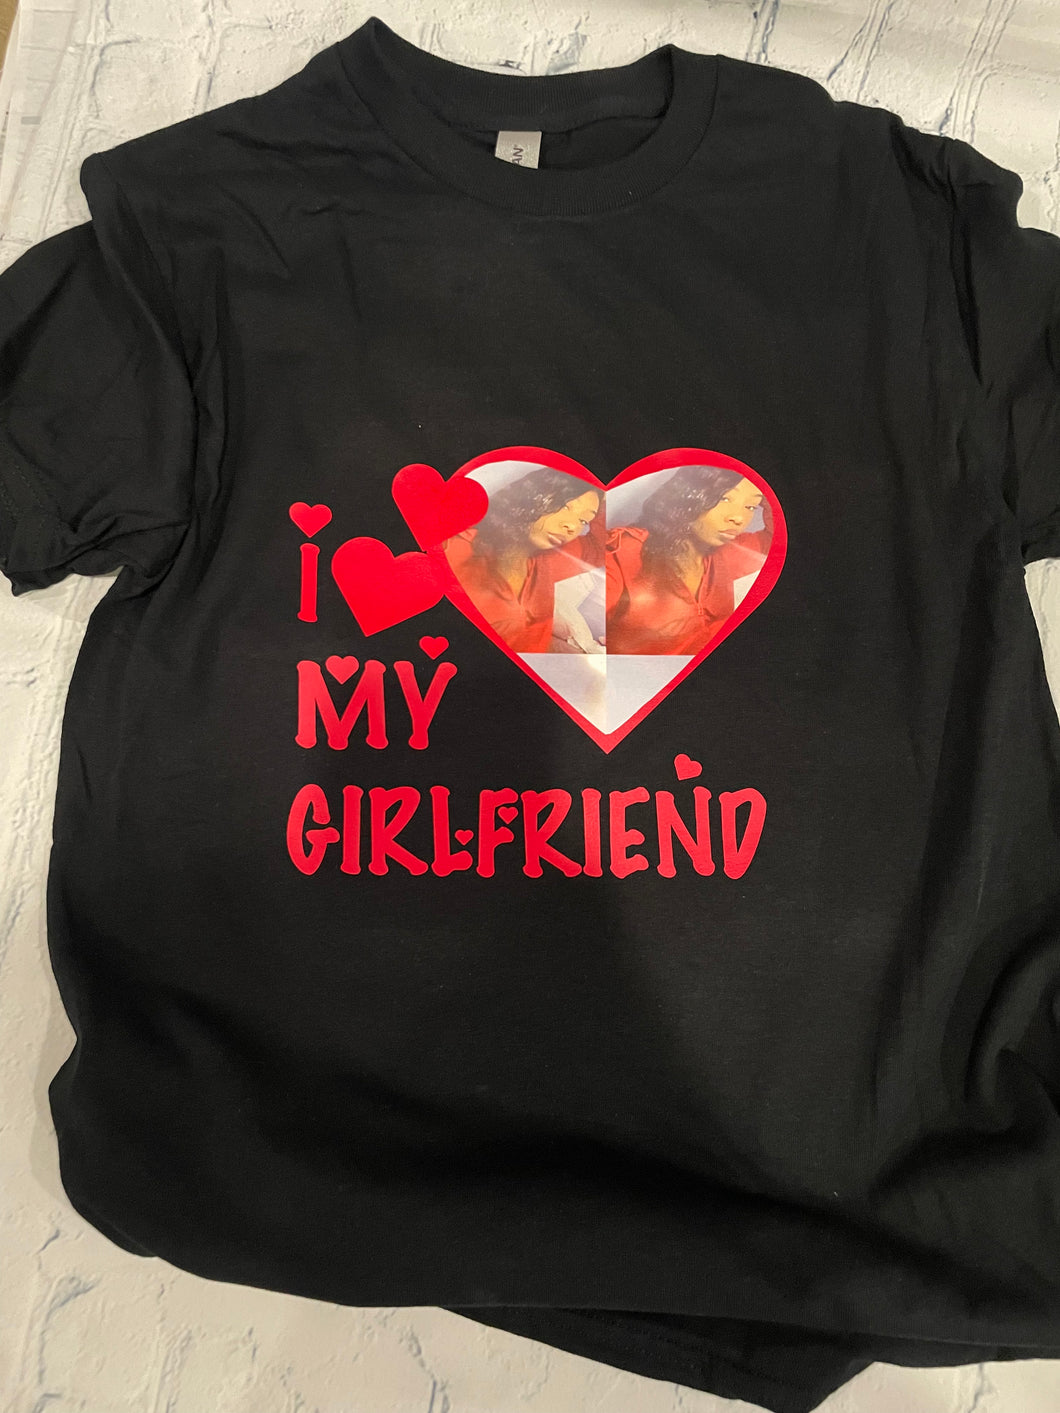 I LOVE MY GF/BF TEE WITH PICTURE